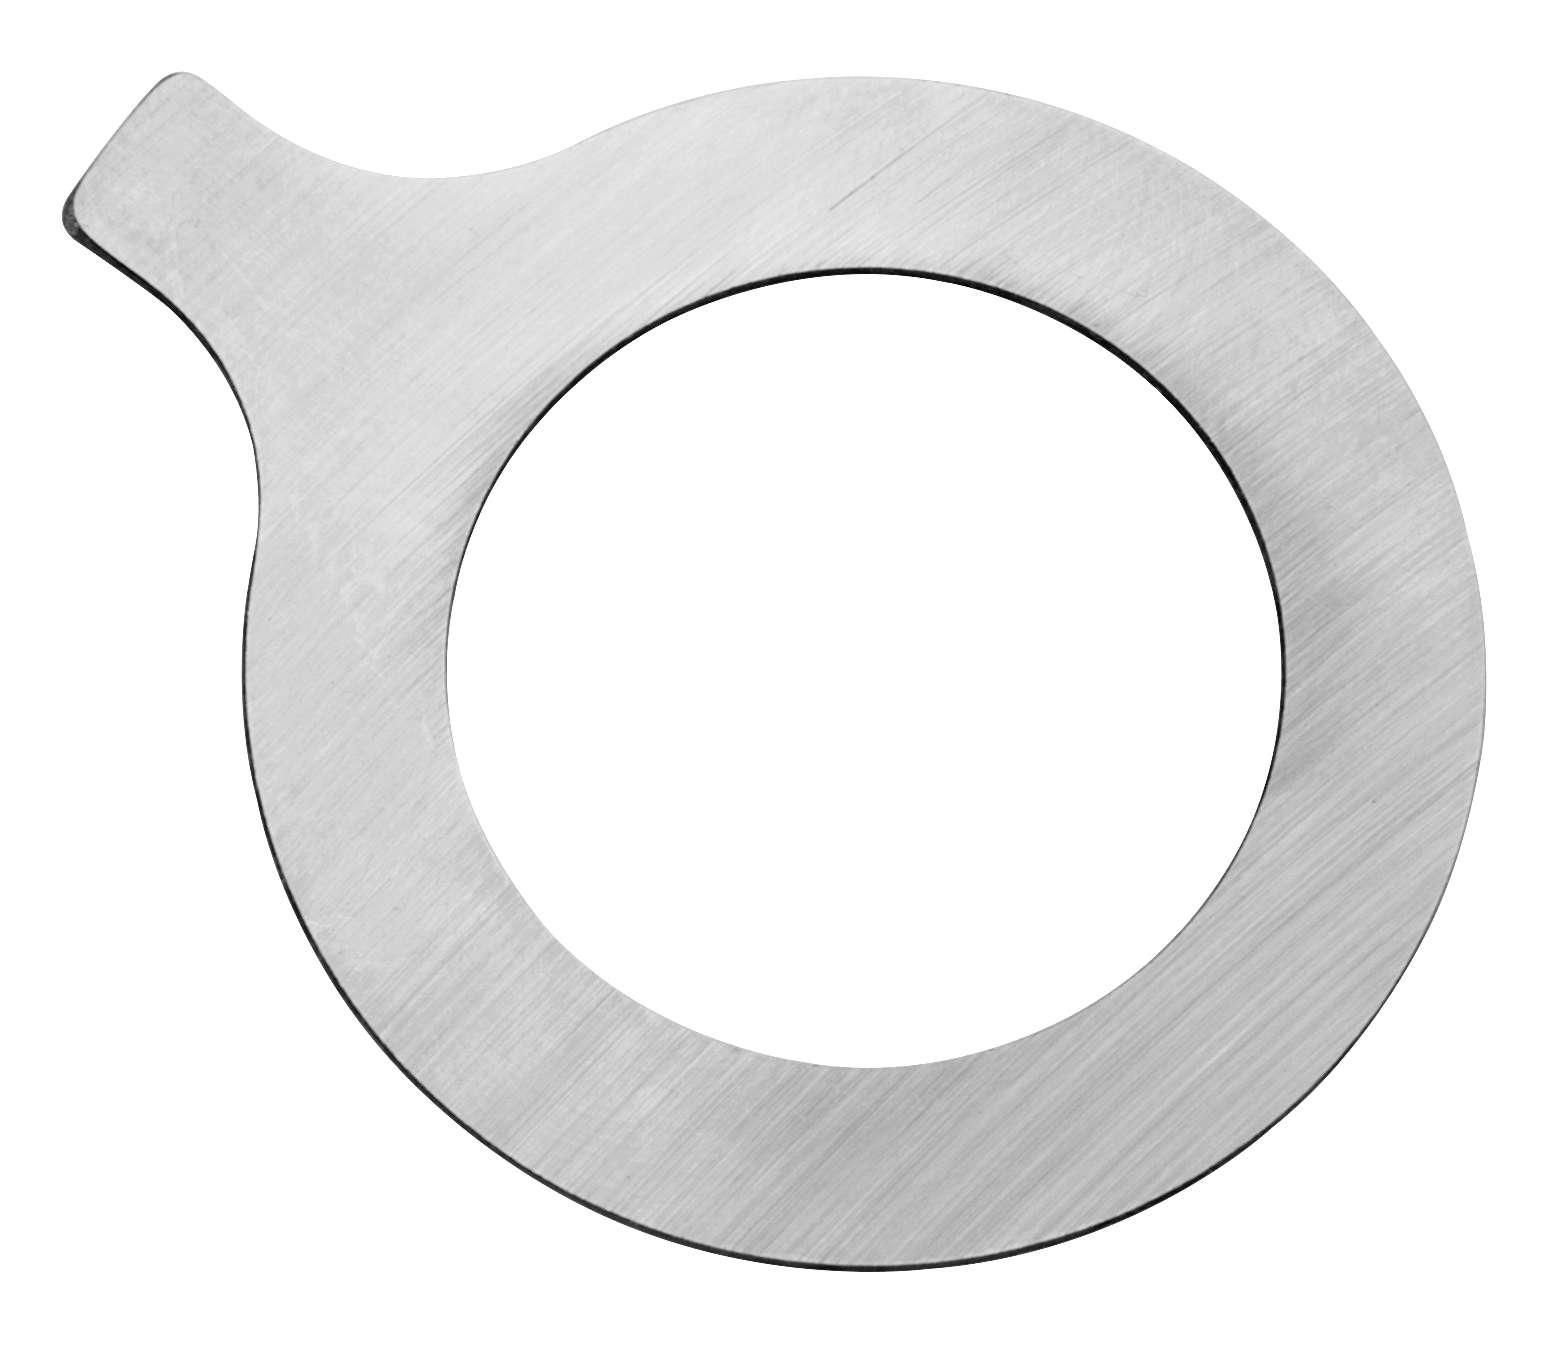 4SZK-EAST-PERF-A-35344-73 Mainshaft Right-Side Thrust Washer - 0.040